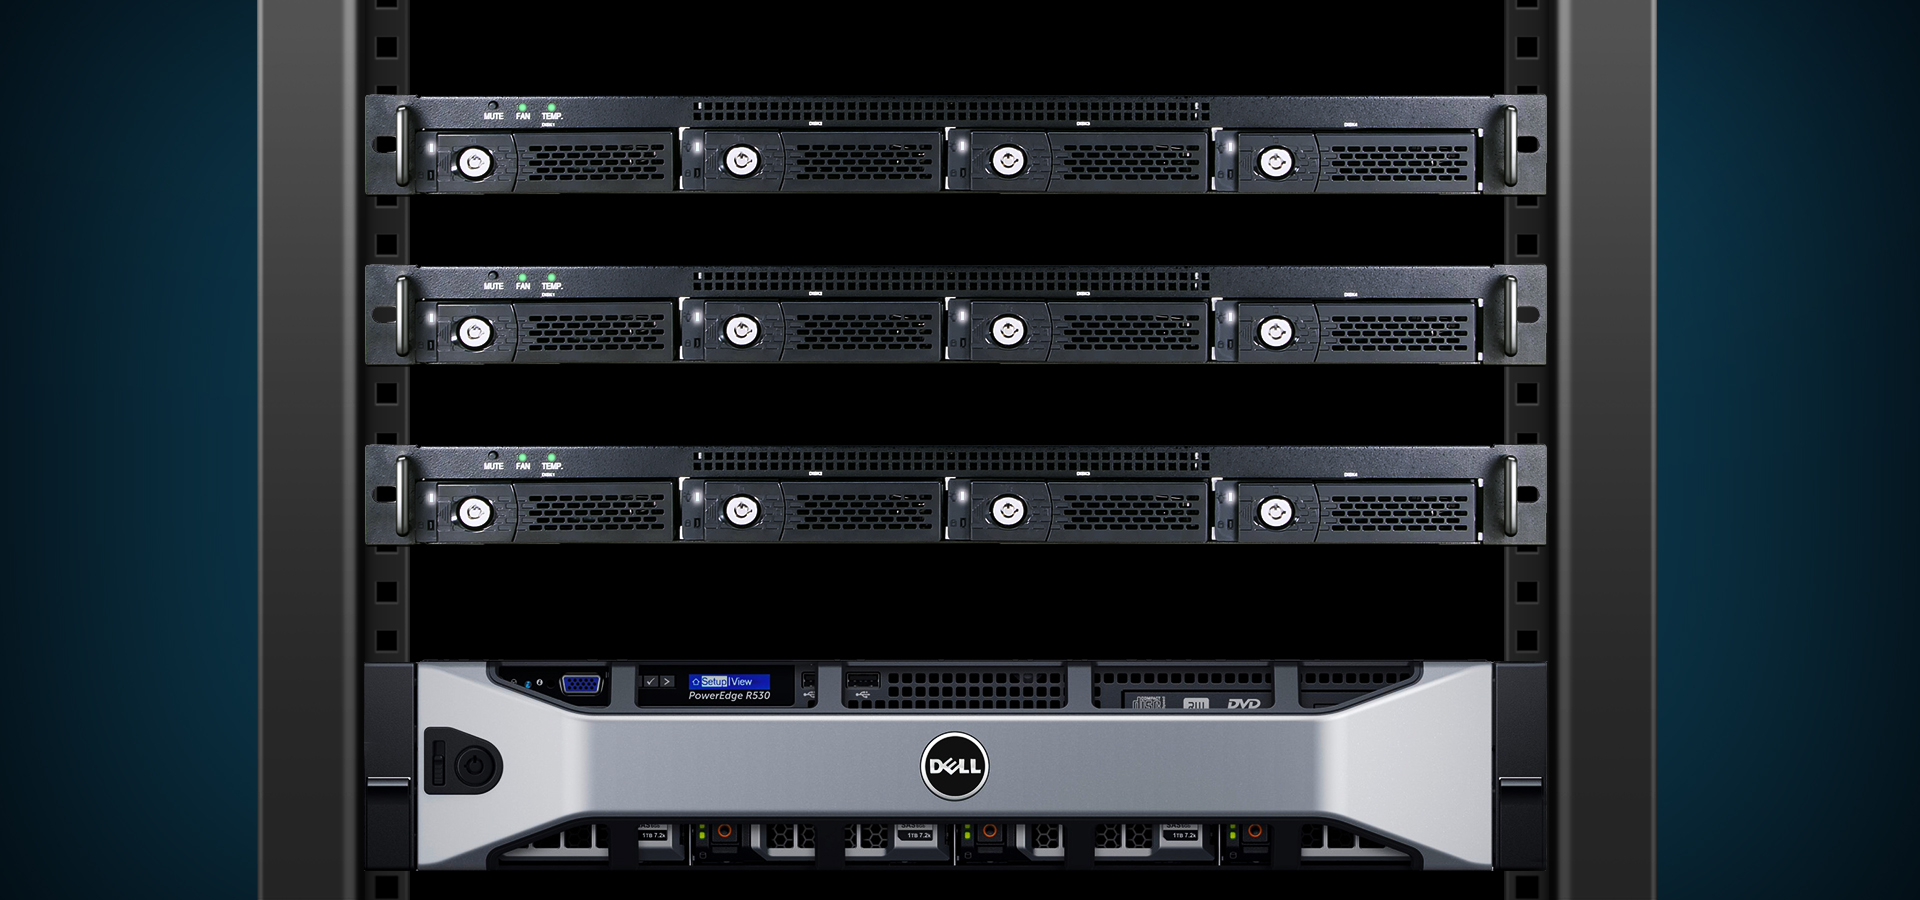 netstor ns370s is created to be aligned with the 19” rack cabinet easily